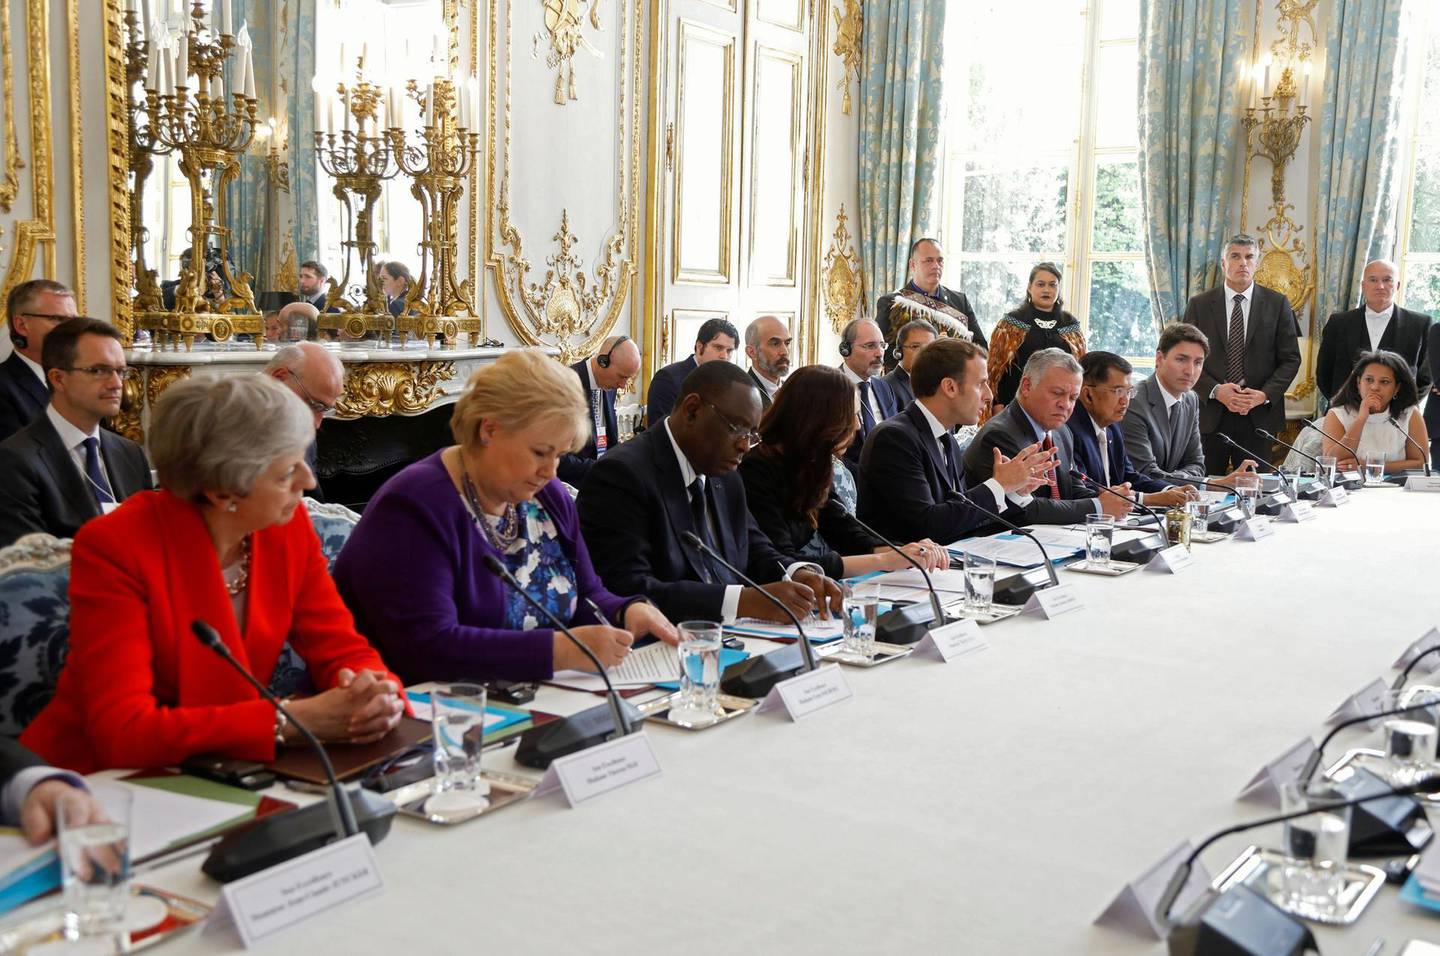 (From L) Britain's Prime Minister Theresa May, Norway's Prime Minister Erna Solberg, Senegal's President Macky Sall, New Zealand's Prime Minister Jacinda Ardern, French President Emmanuel Macron, King Abdullah II of Jordan, Indonesia's vice-President Jusuf Kalla, Canada's Prime Minister Justin Trudeau and President of France's National Digital Council Salwa Toko attend a launching ceremony for the 'Christchurch call', an initiative pushed by Ardern after a self-described white supremacist gunned down 51 people in a massacre at two mosques in the New Zealand city in March, at the Elysee Palace in Paris, on May 15, 2019. French President and New Zealand's premier host other world leaders and leading tech chiefs to launch an ambitious new initiative aimed at curbing extremism online. The political meeting will run in parallel to an initiative launched by Macron called Tech for Good which will bring together 80 tech chiefs in Paris to find a way for new technologies to work for the common good. / AFP / X00217 / CHARLES PLATIAU
